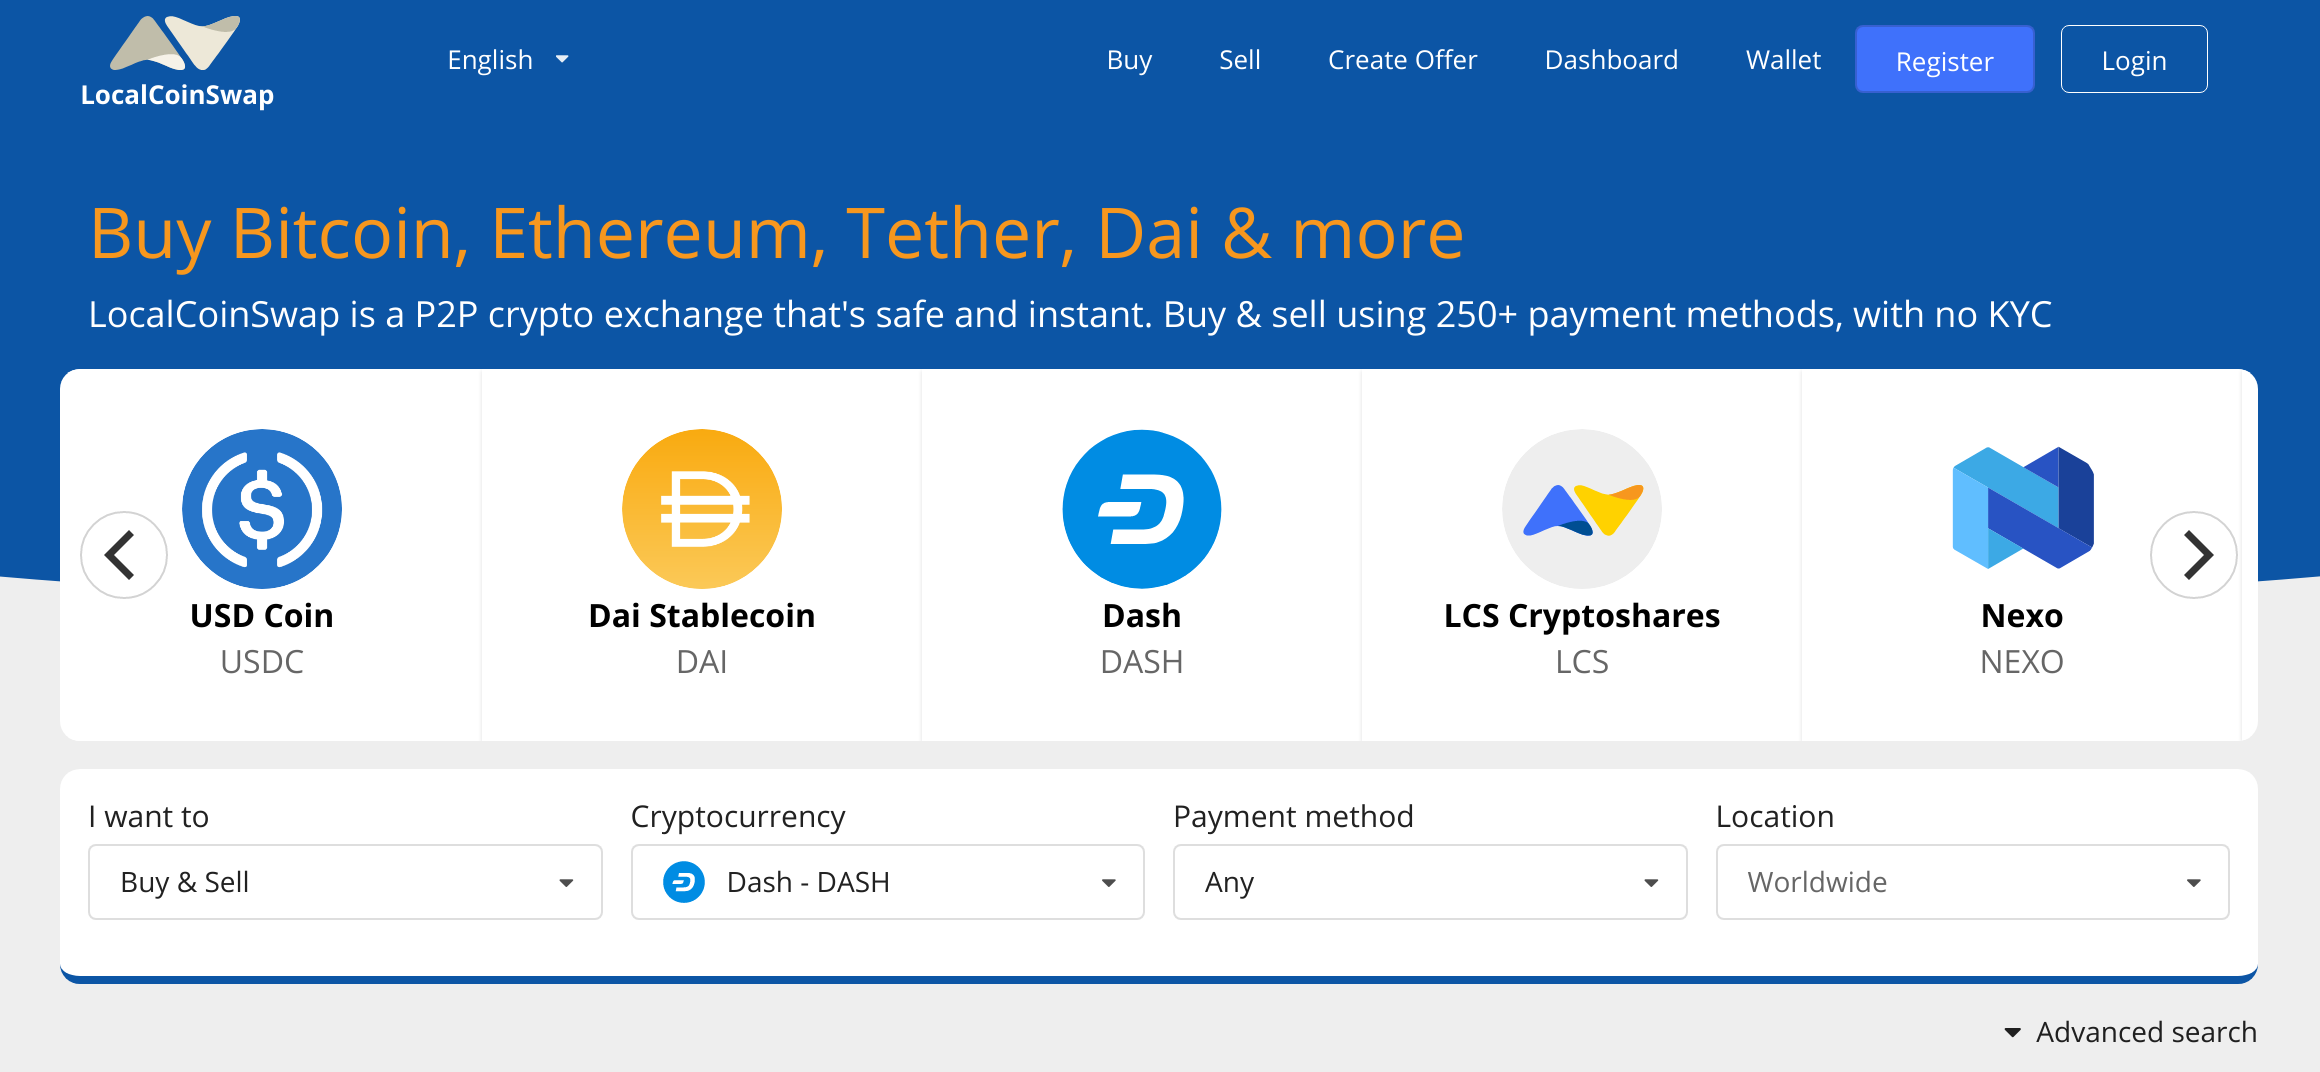 trading Dash cryptocurrency worldwide for cash and other payment methods